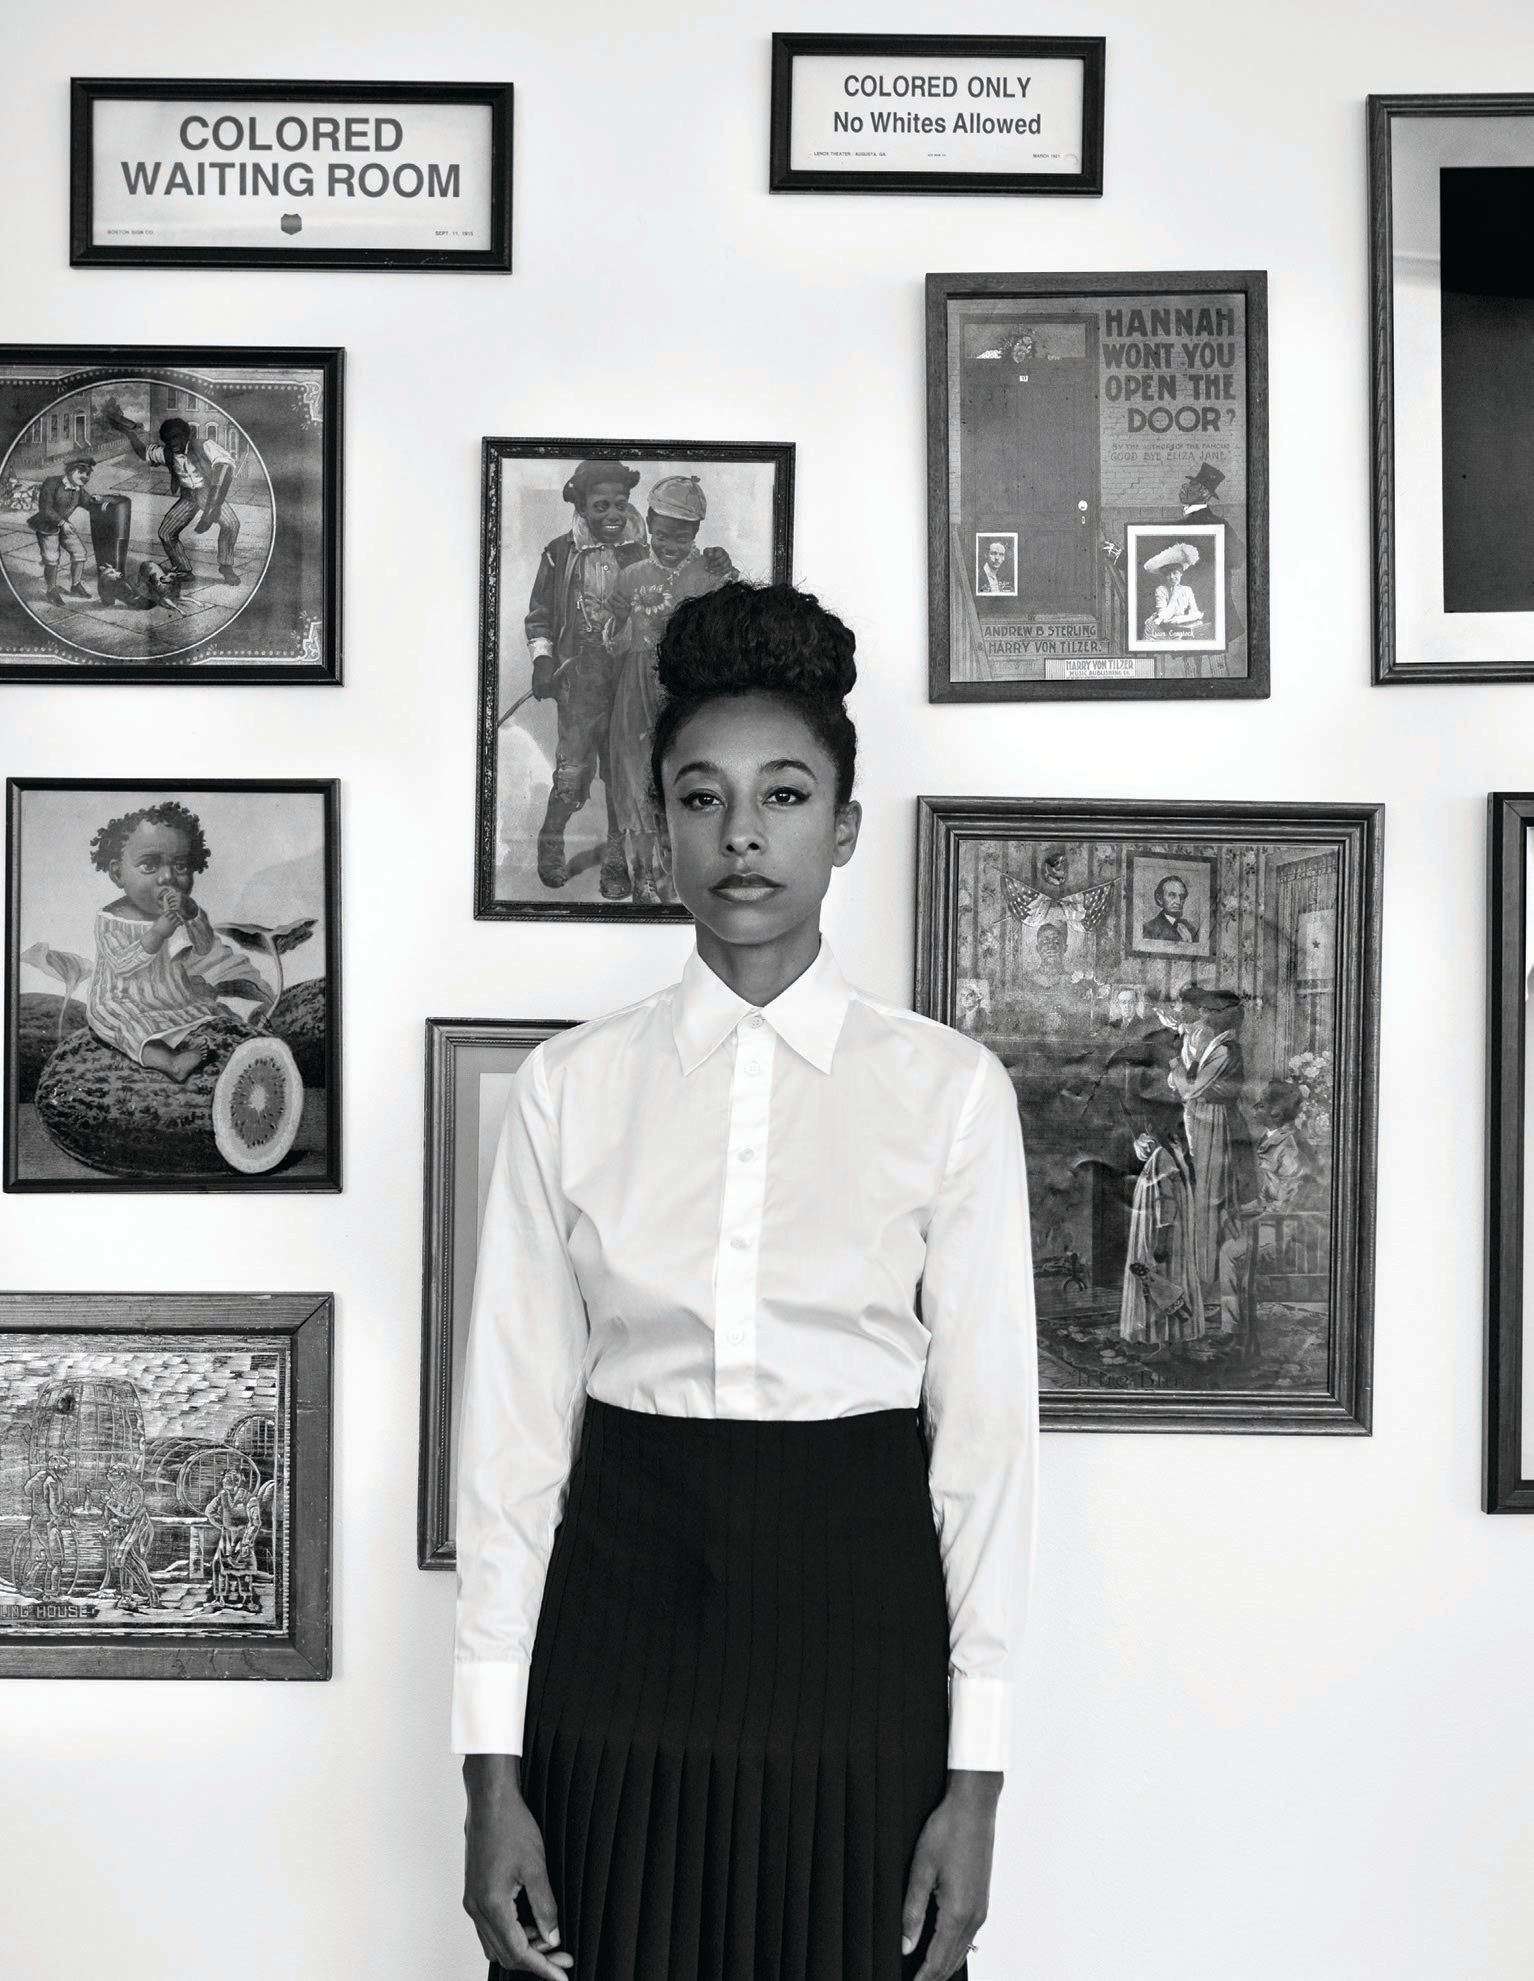 Corinne Bailey Rae’s Black Rainbows album is inspired by the artwork, objects and historical archive at Theaster Gates’ Stony Island Arts Bank. PHOTO BY KOTO BOLOFO